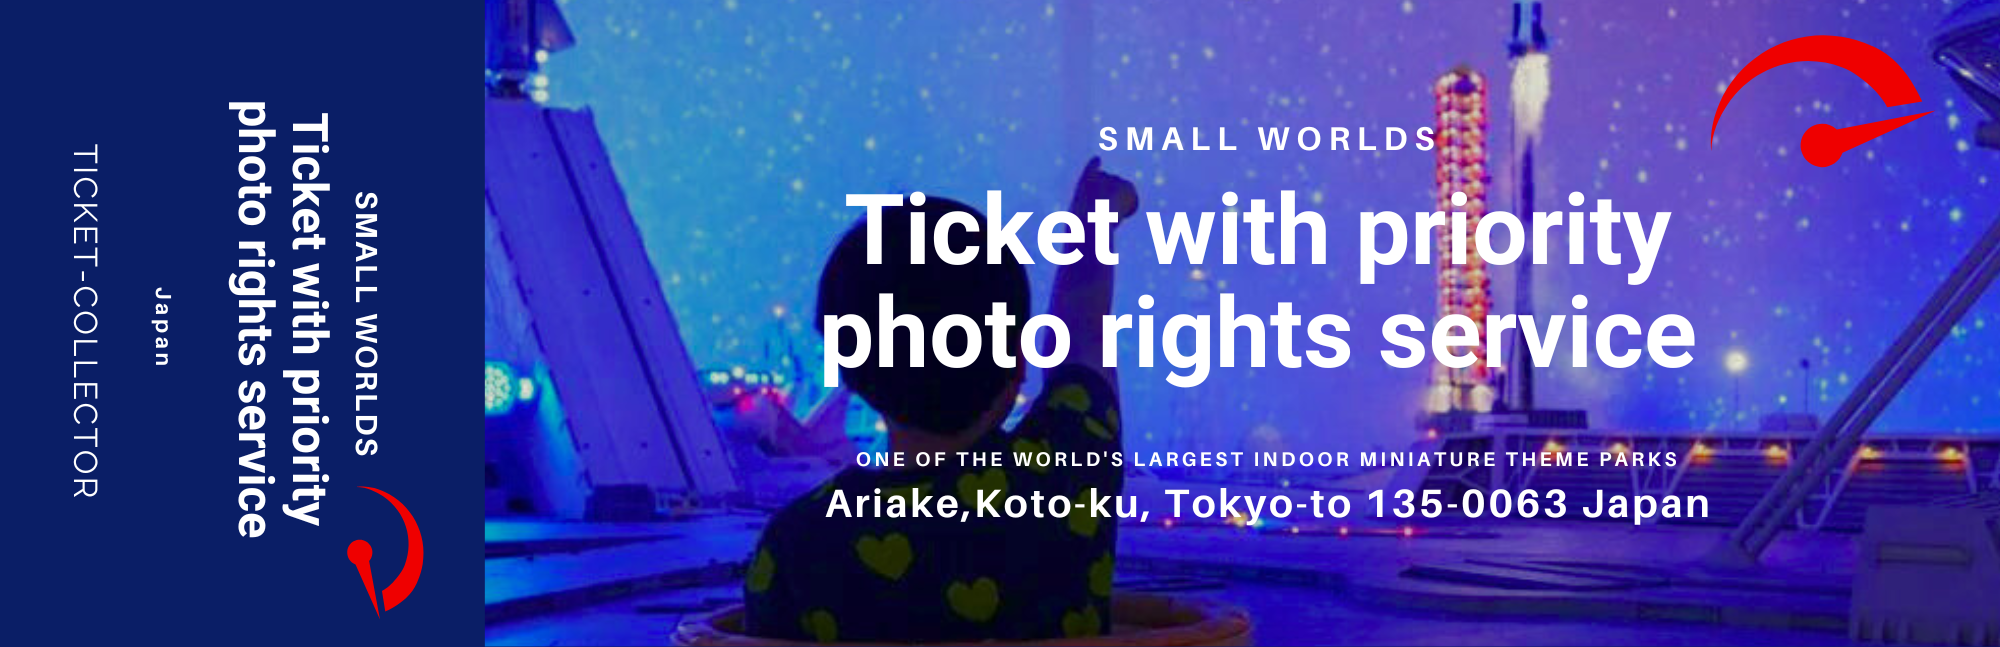 Ticket with priority photo rights service